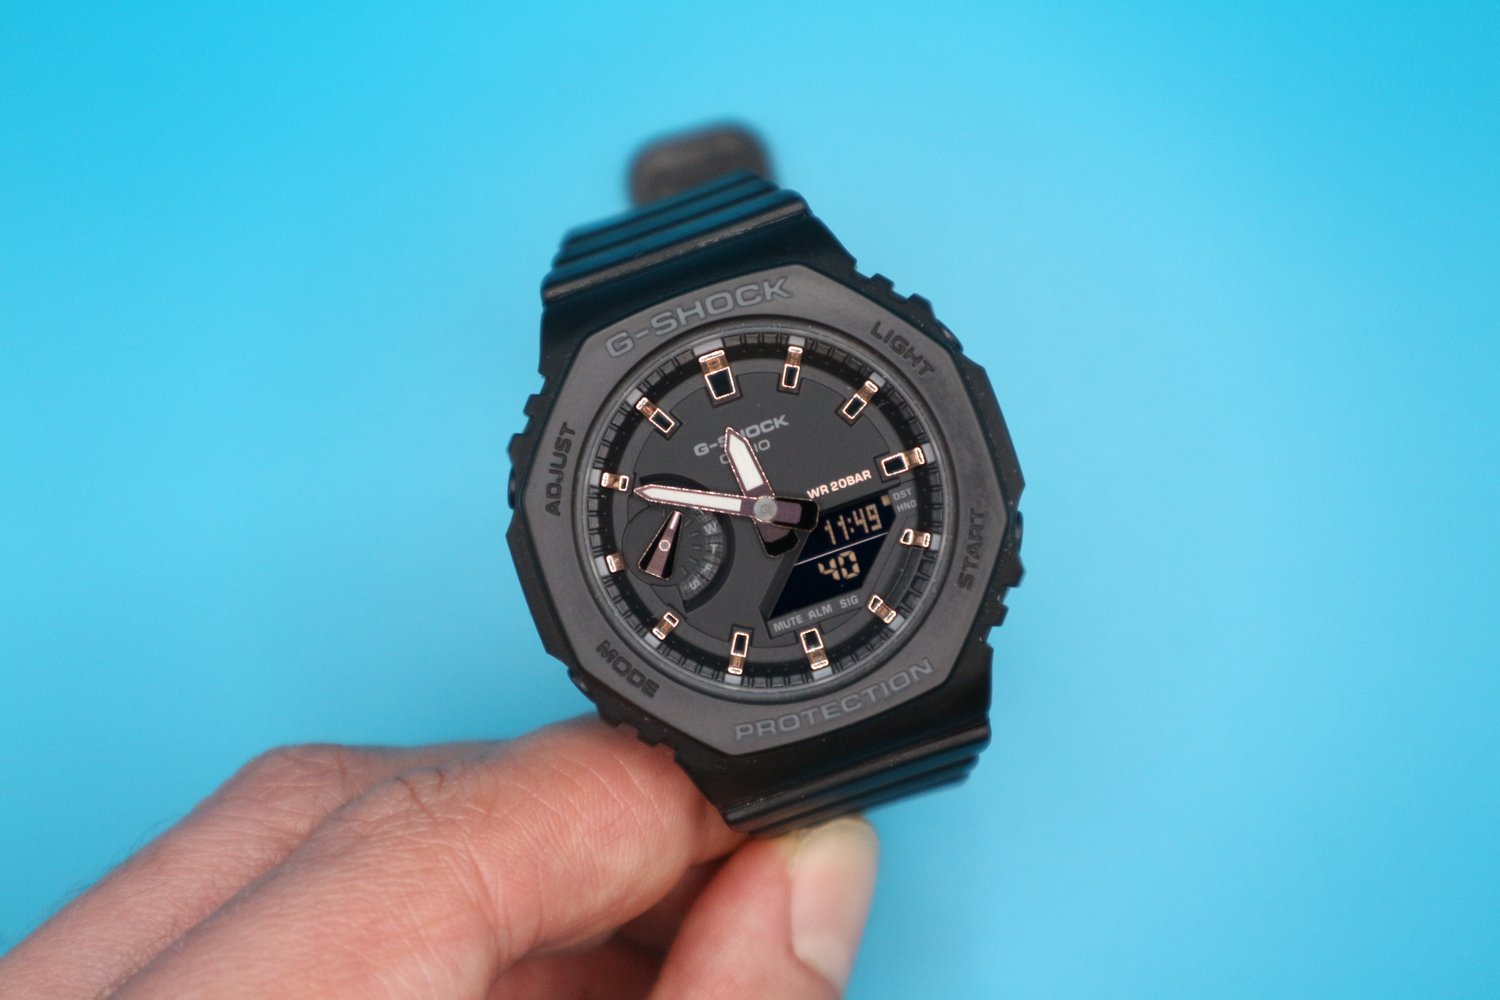 — Review: Still GA-2100 TheWatchMuse Worth Buying? \'CasiOak\' Casio Is G-Shock It